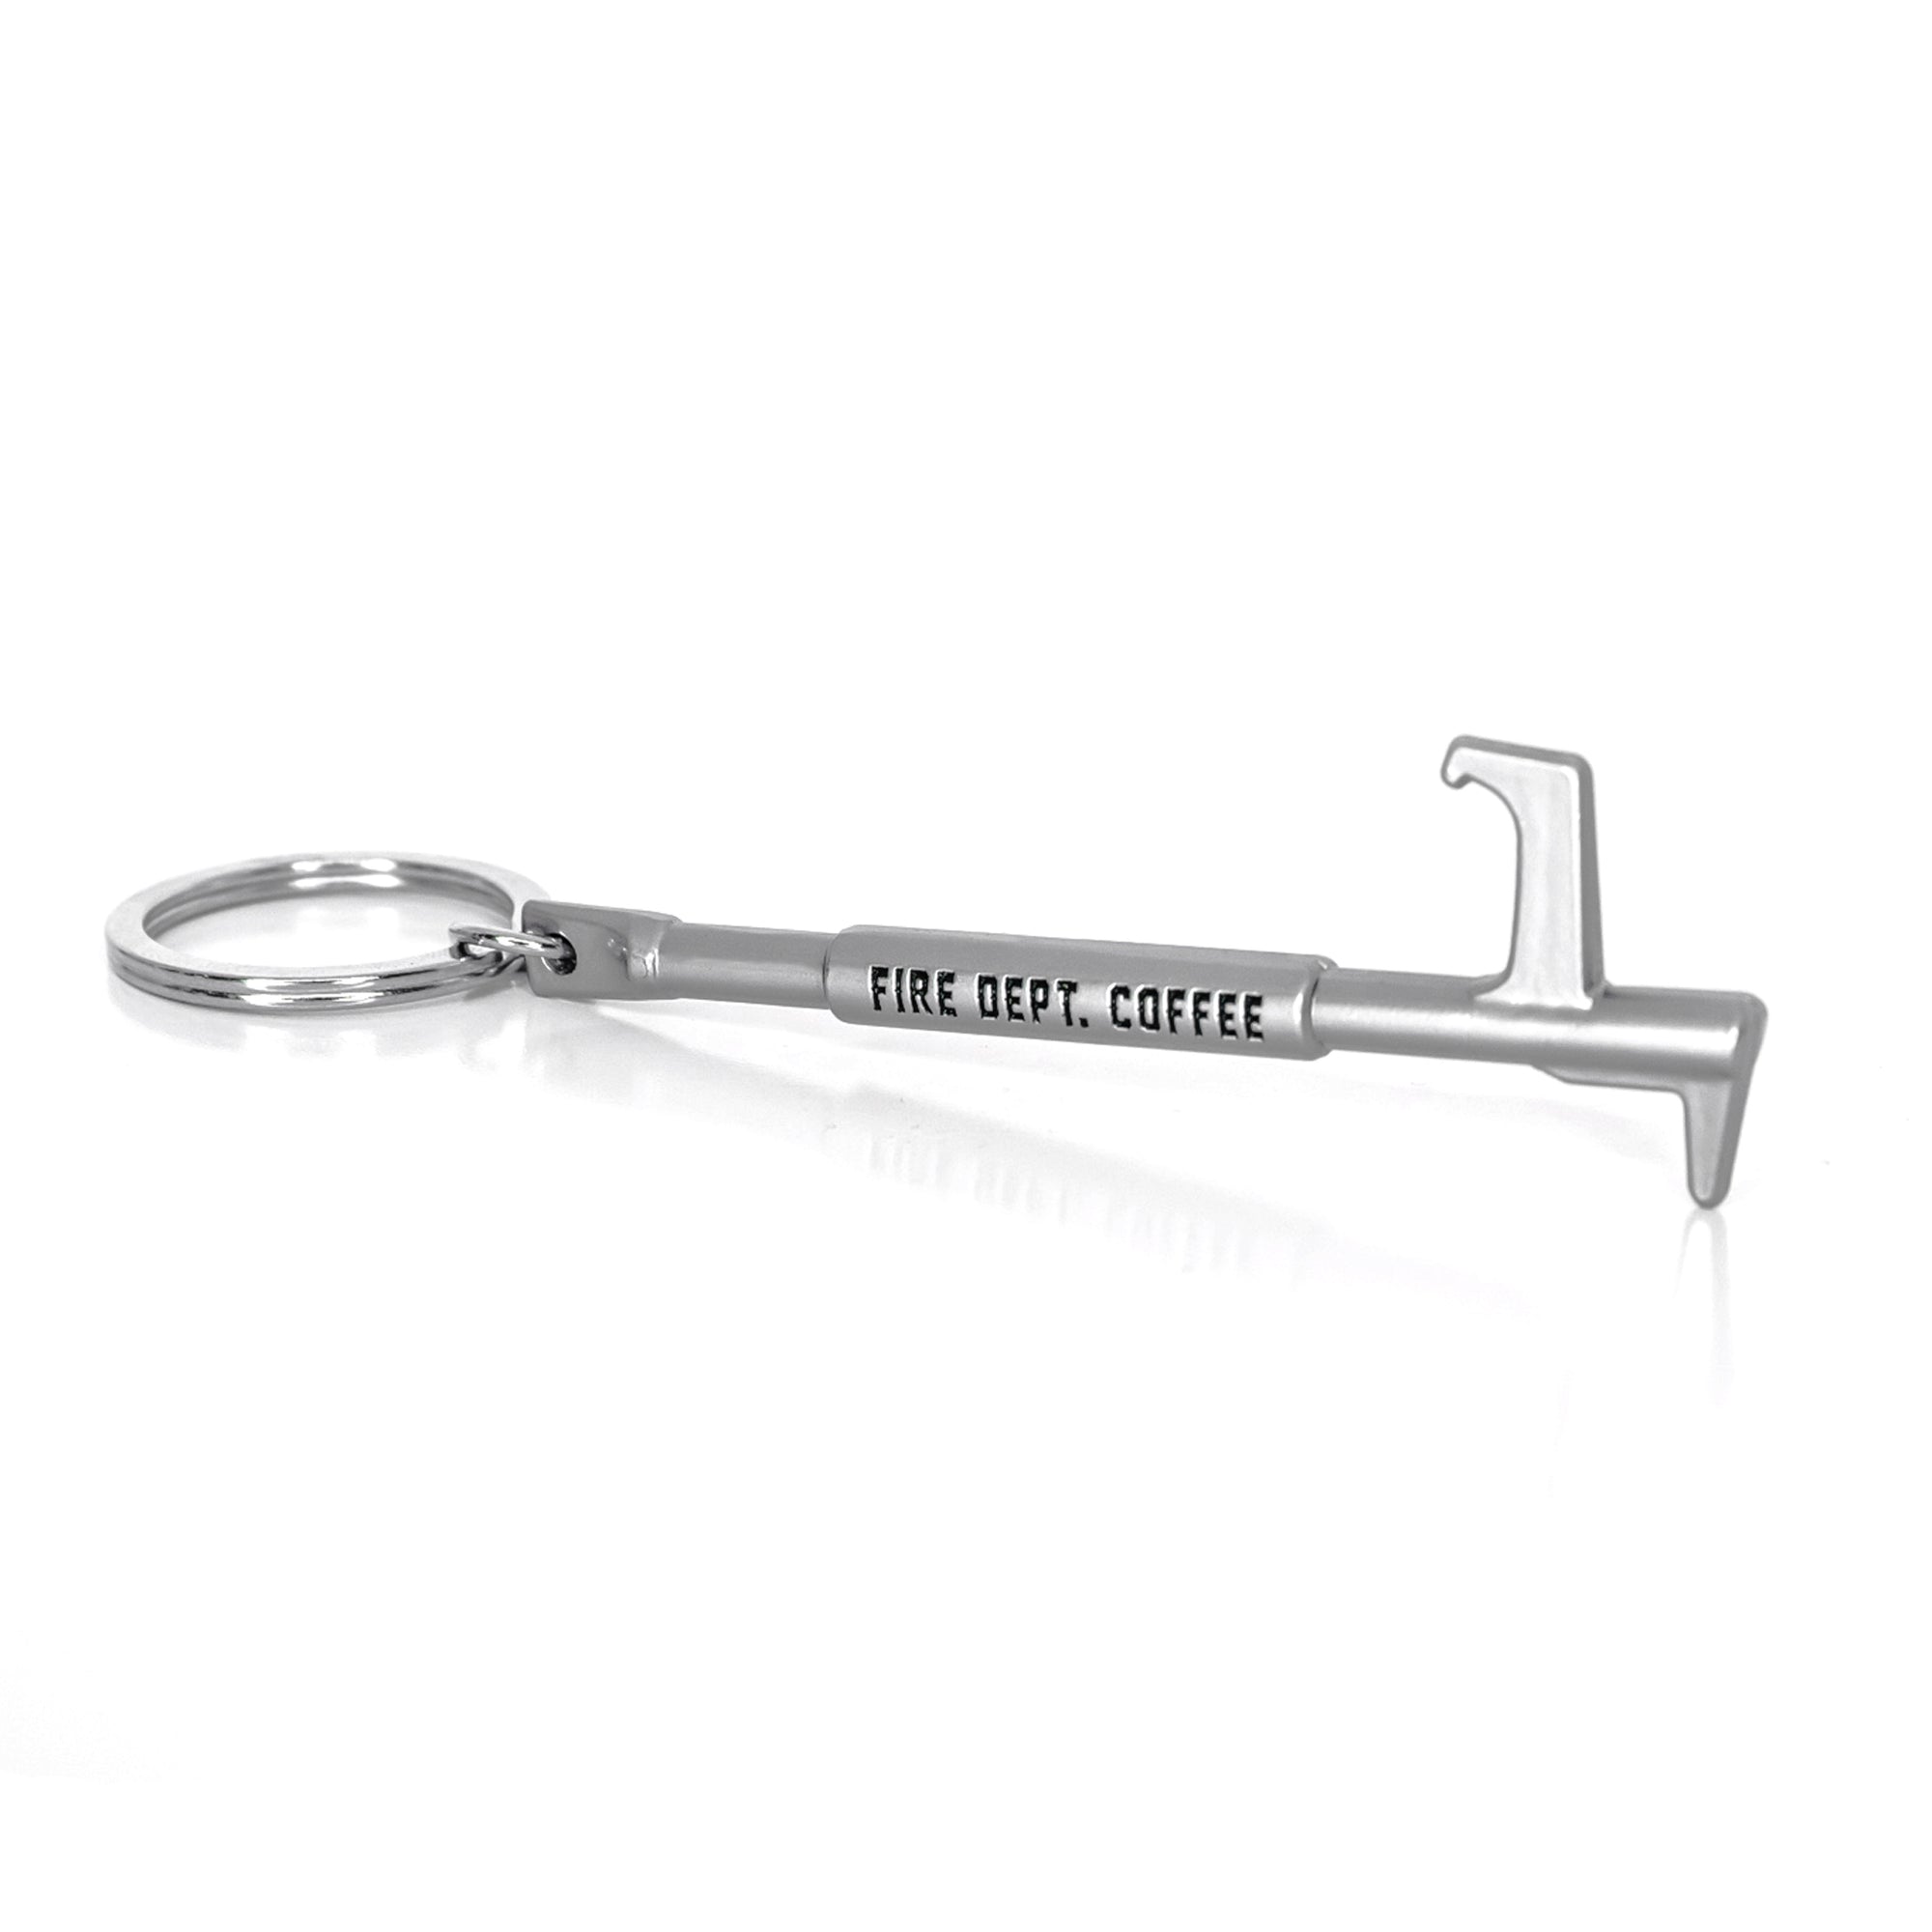 A New York Hook bottle opener scaled to fit your keychain.